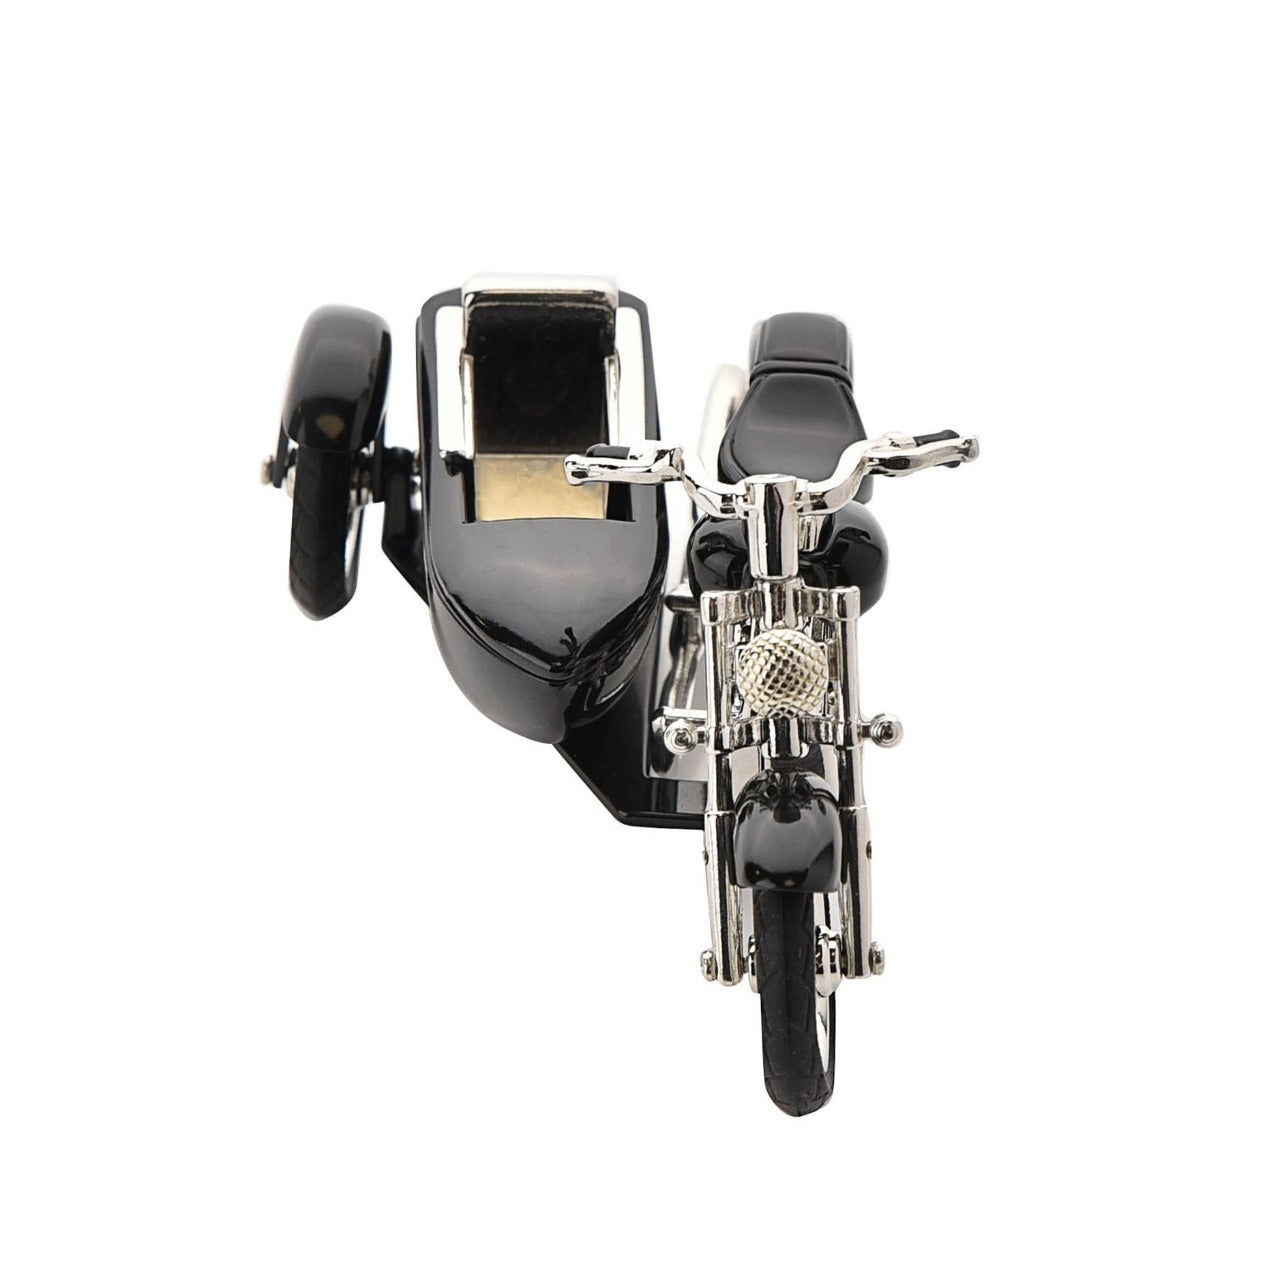 Miniature Clock - Motorbike & Sidecar Black  The intricately detailed die-cast chrome finish motorcycle features glossy black trim details and an Arabic dial clock face set below the fuel tank. The bike includes moving wheels and turntable handlebars. You can also detatch the sidecar if preferred.